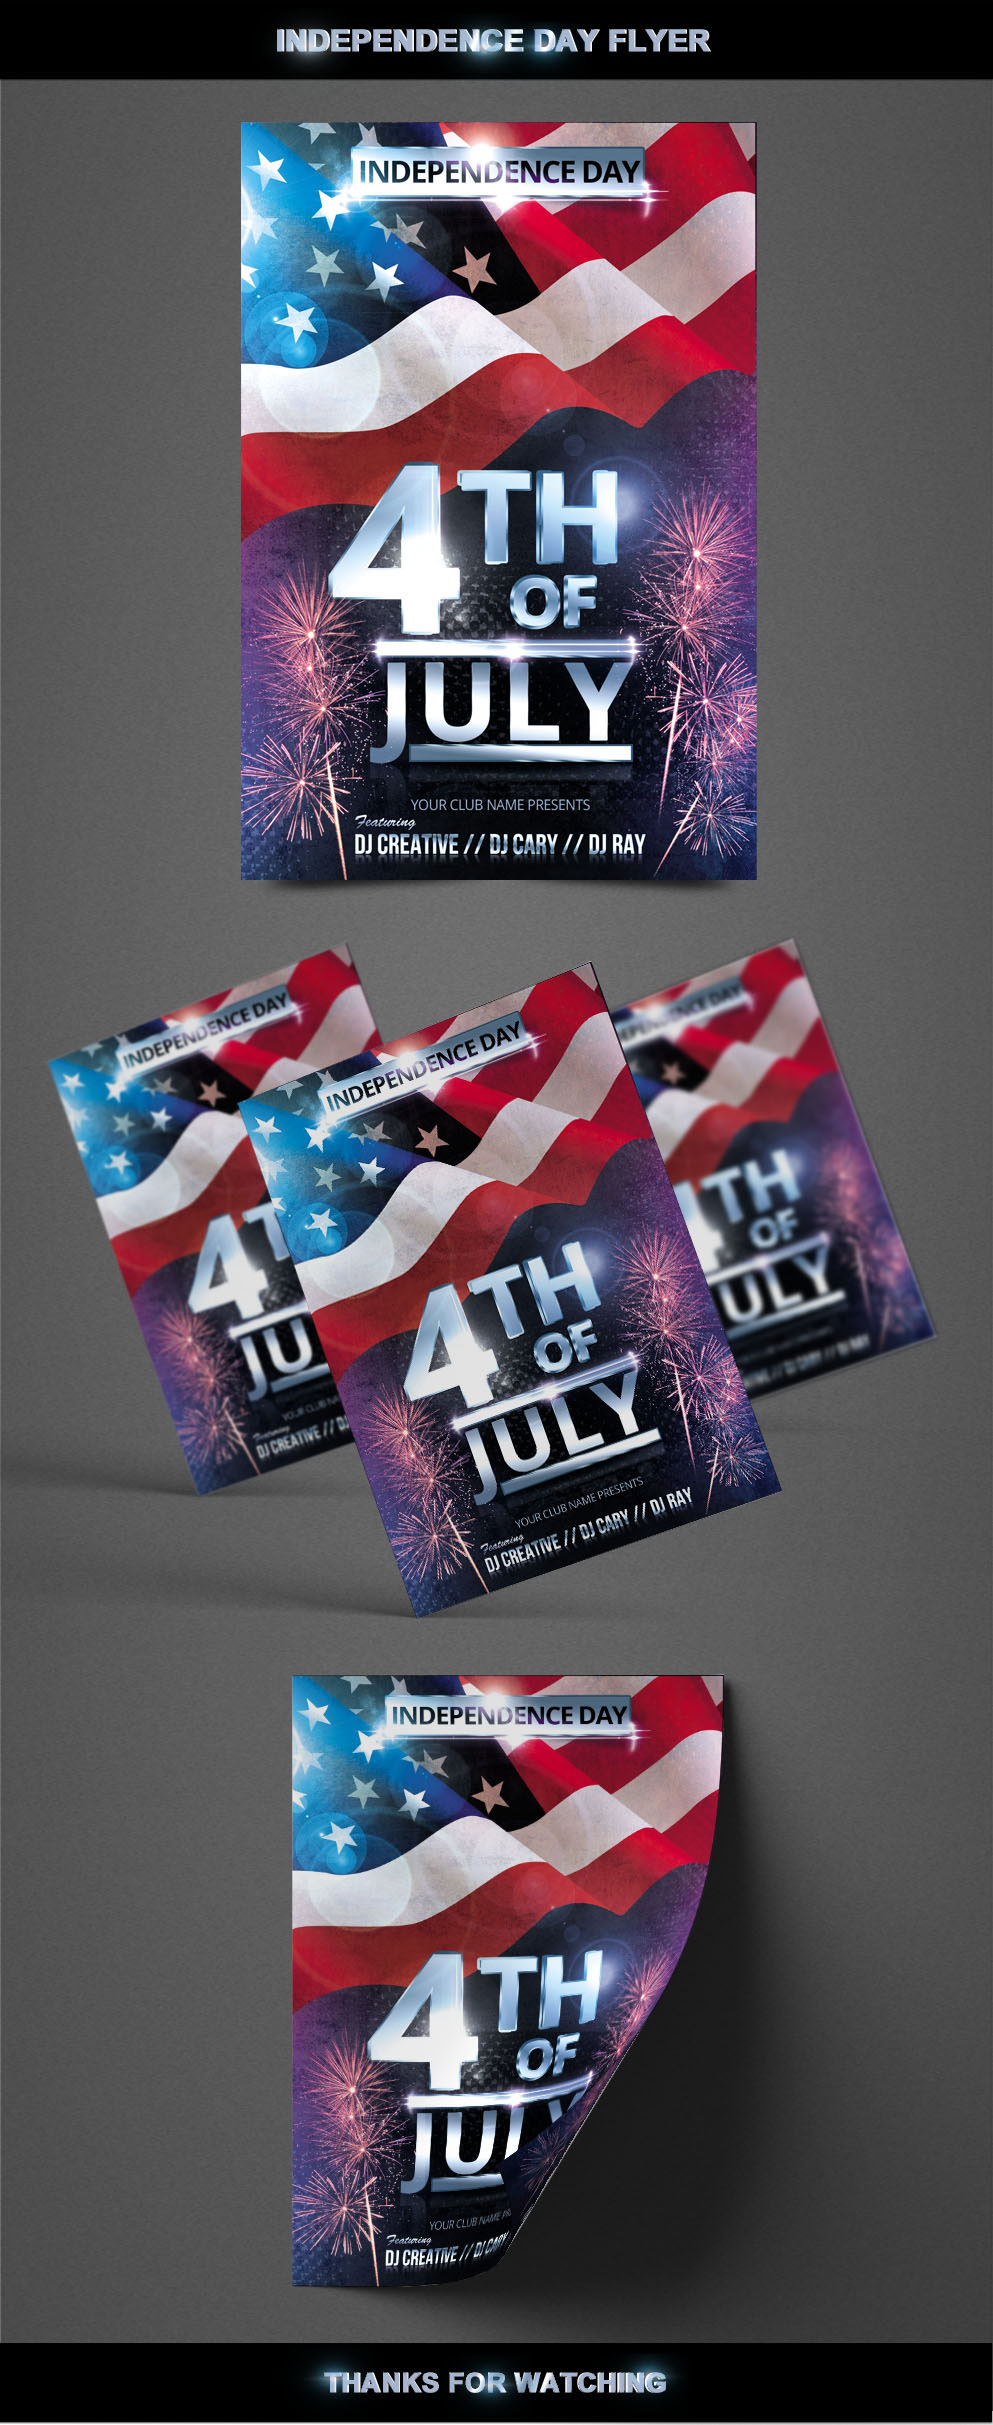 4th of July america american Event american flag firework fireworks fourth of july freedom independence day flyer independence event Independence flyer july